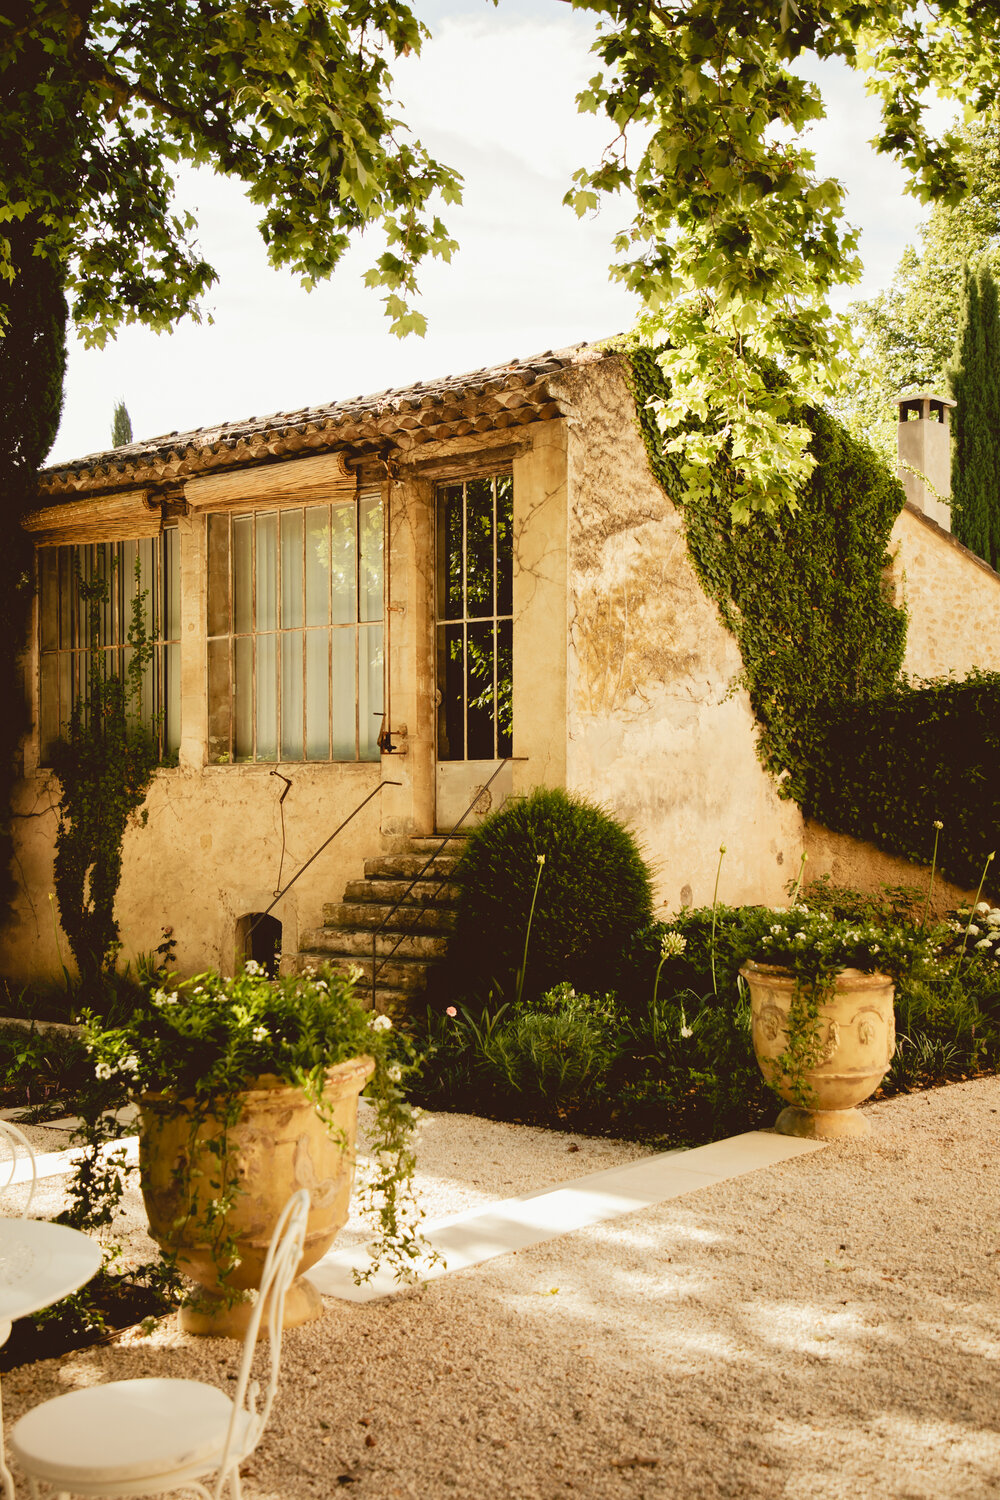 A Provencal Stay at Le Galinier Hotel in Lourmarin France